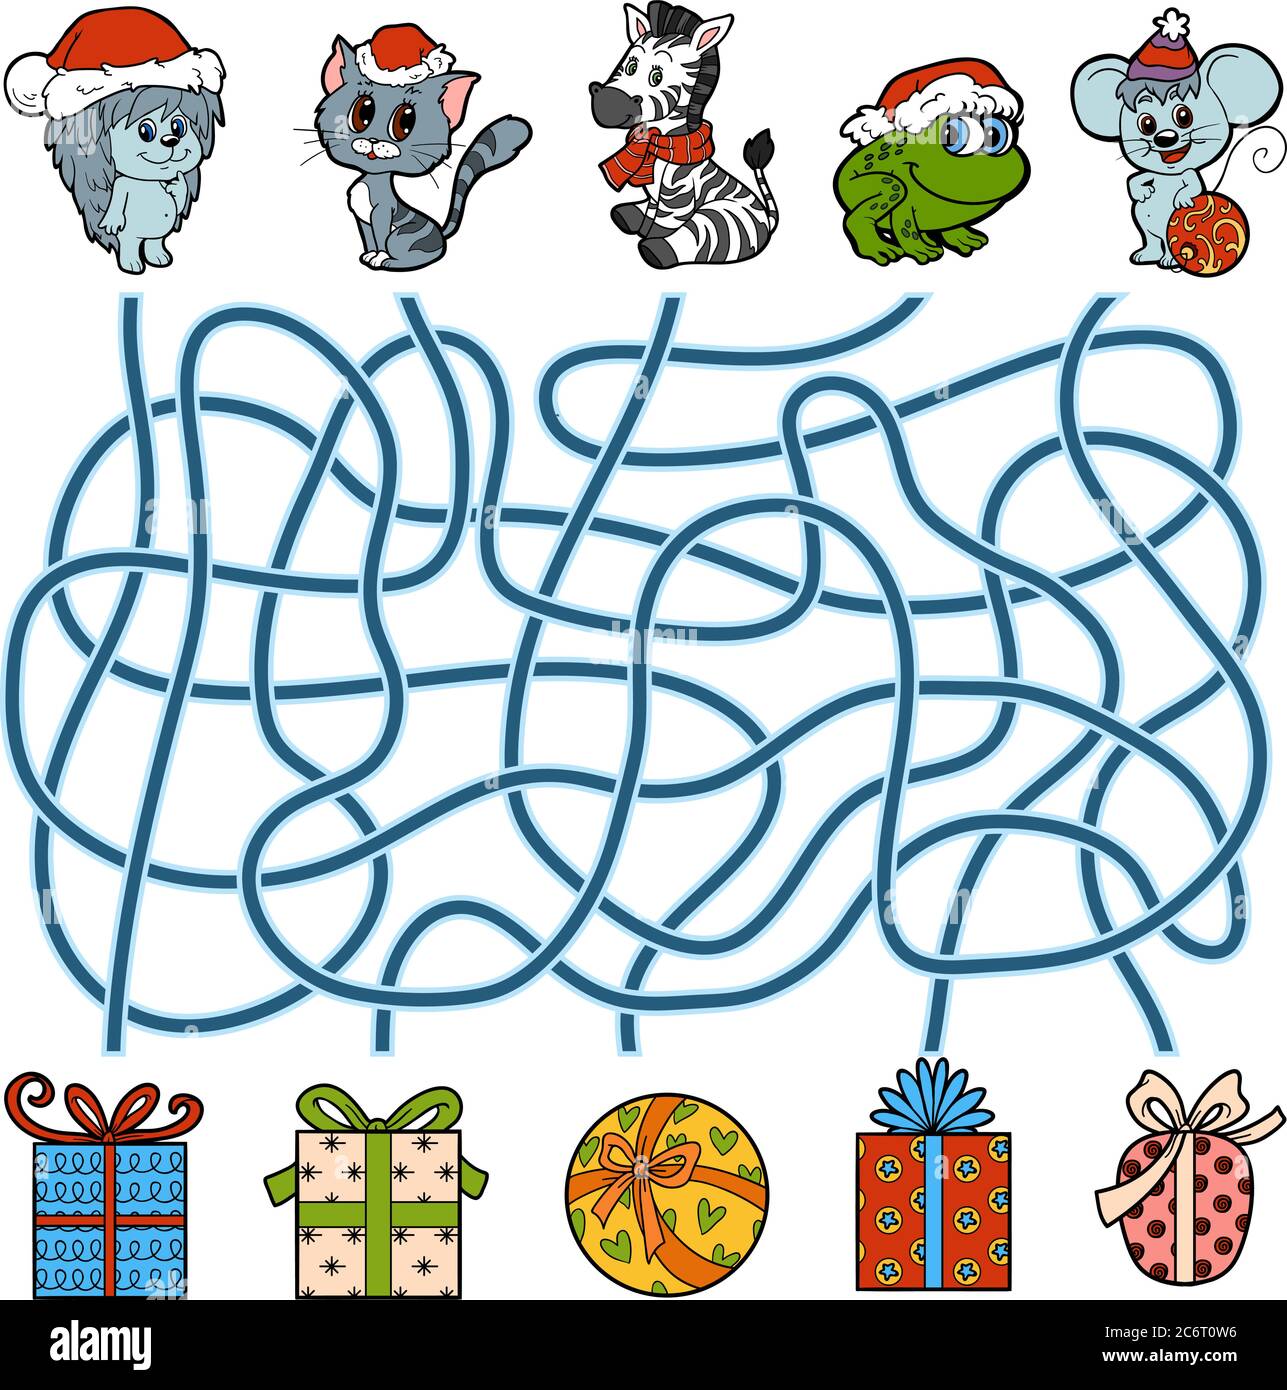 Maze education game for children, little animals and Christmas gifts Stock Vector